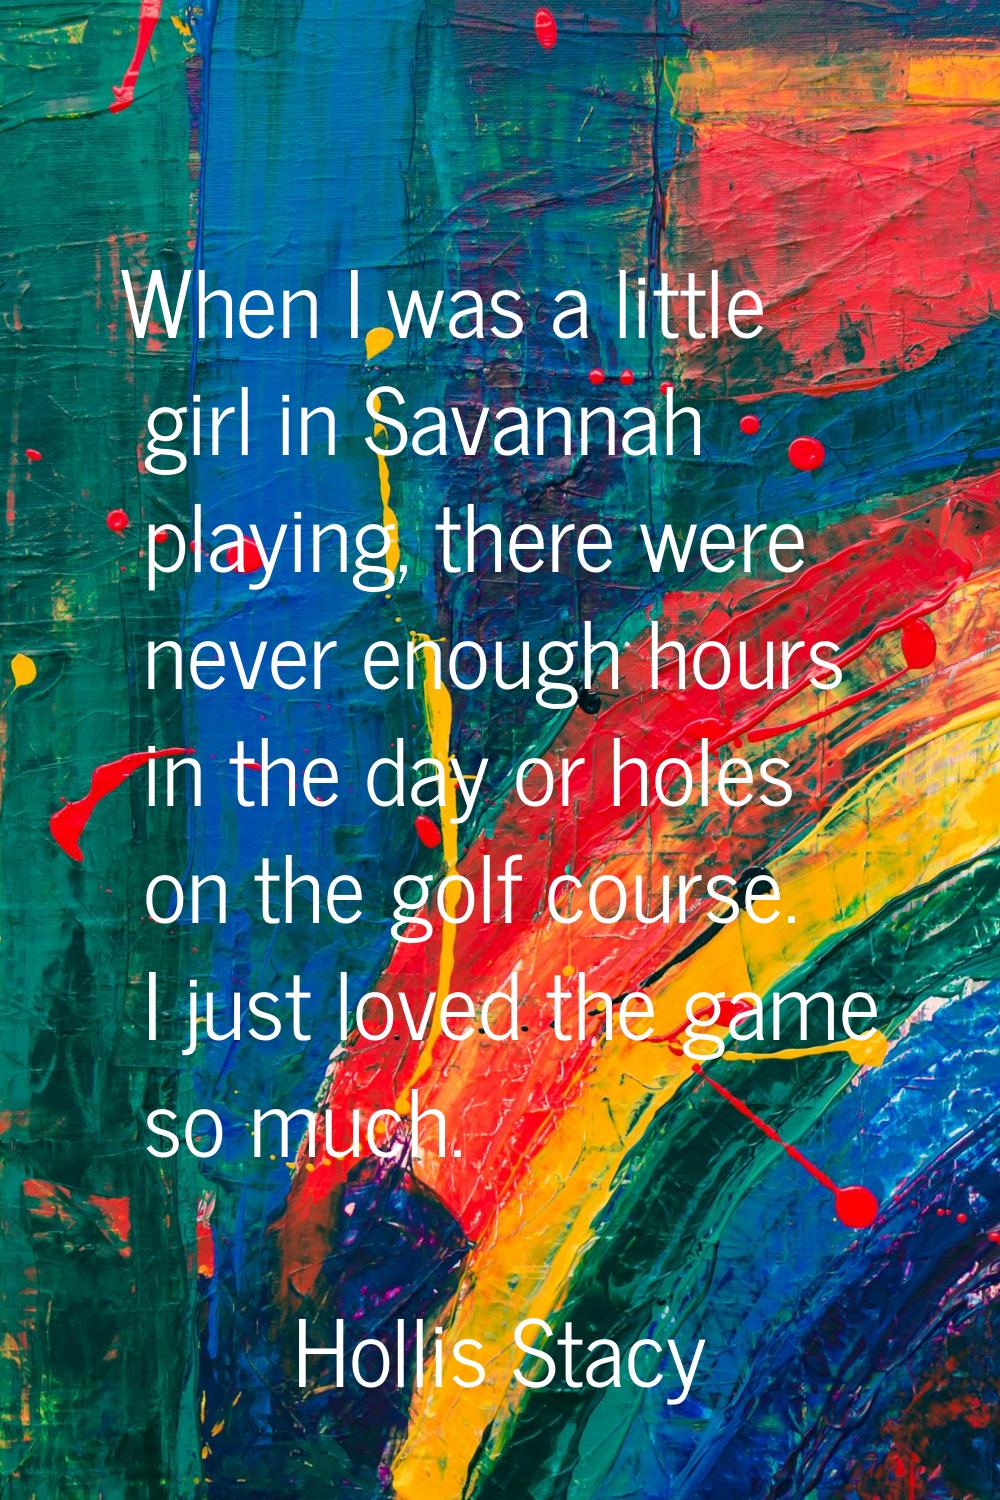 When I was a little girl in Savannah playing, there were never enough hours in the day or holes on 